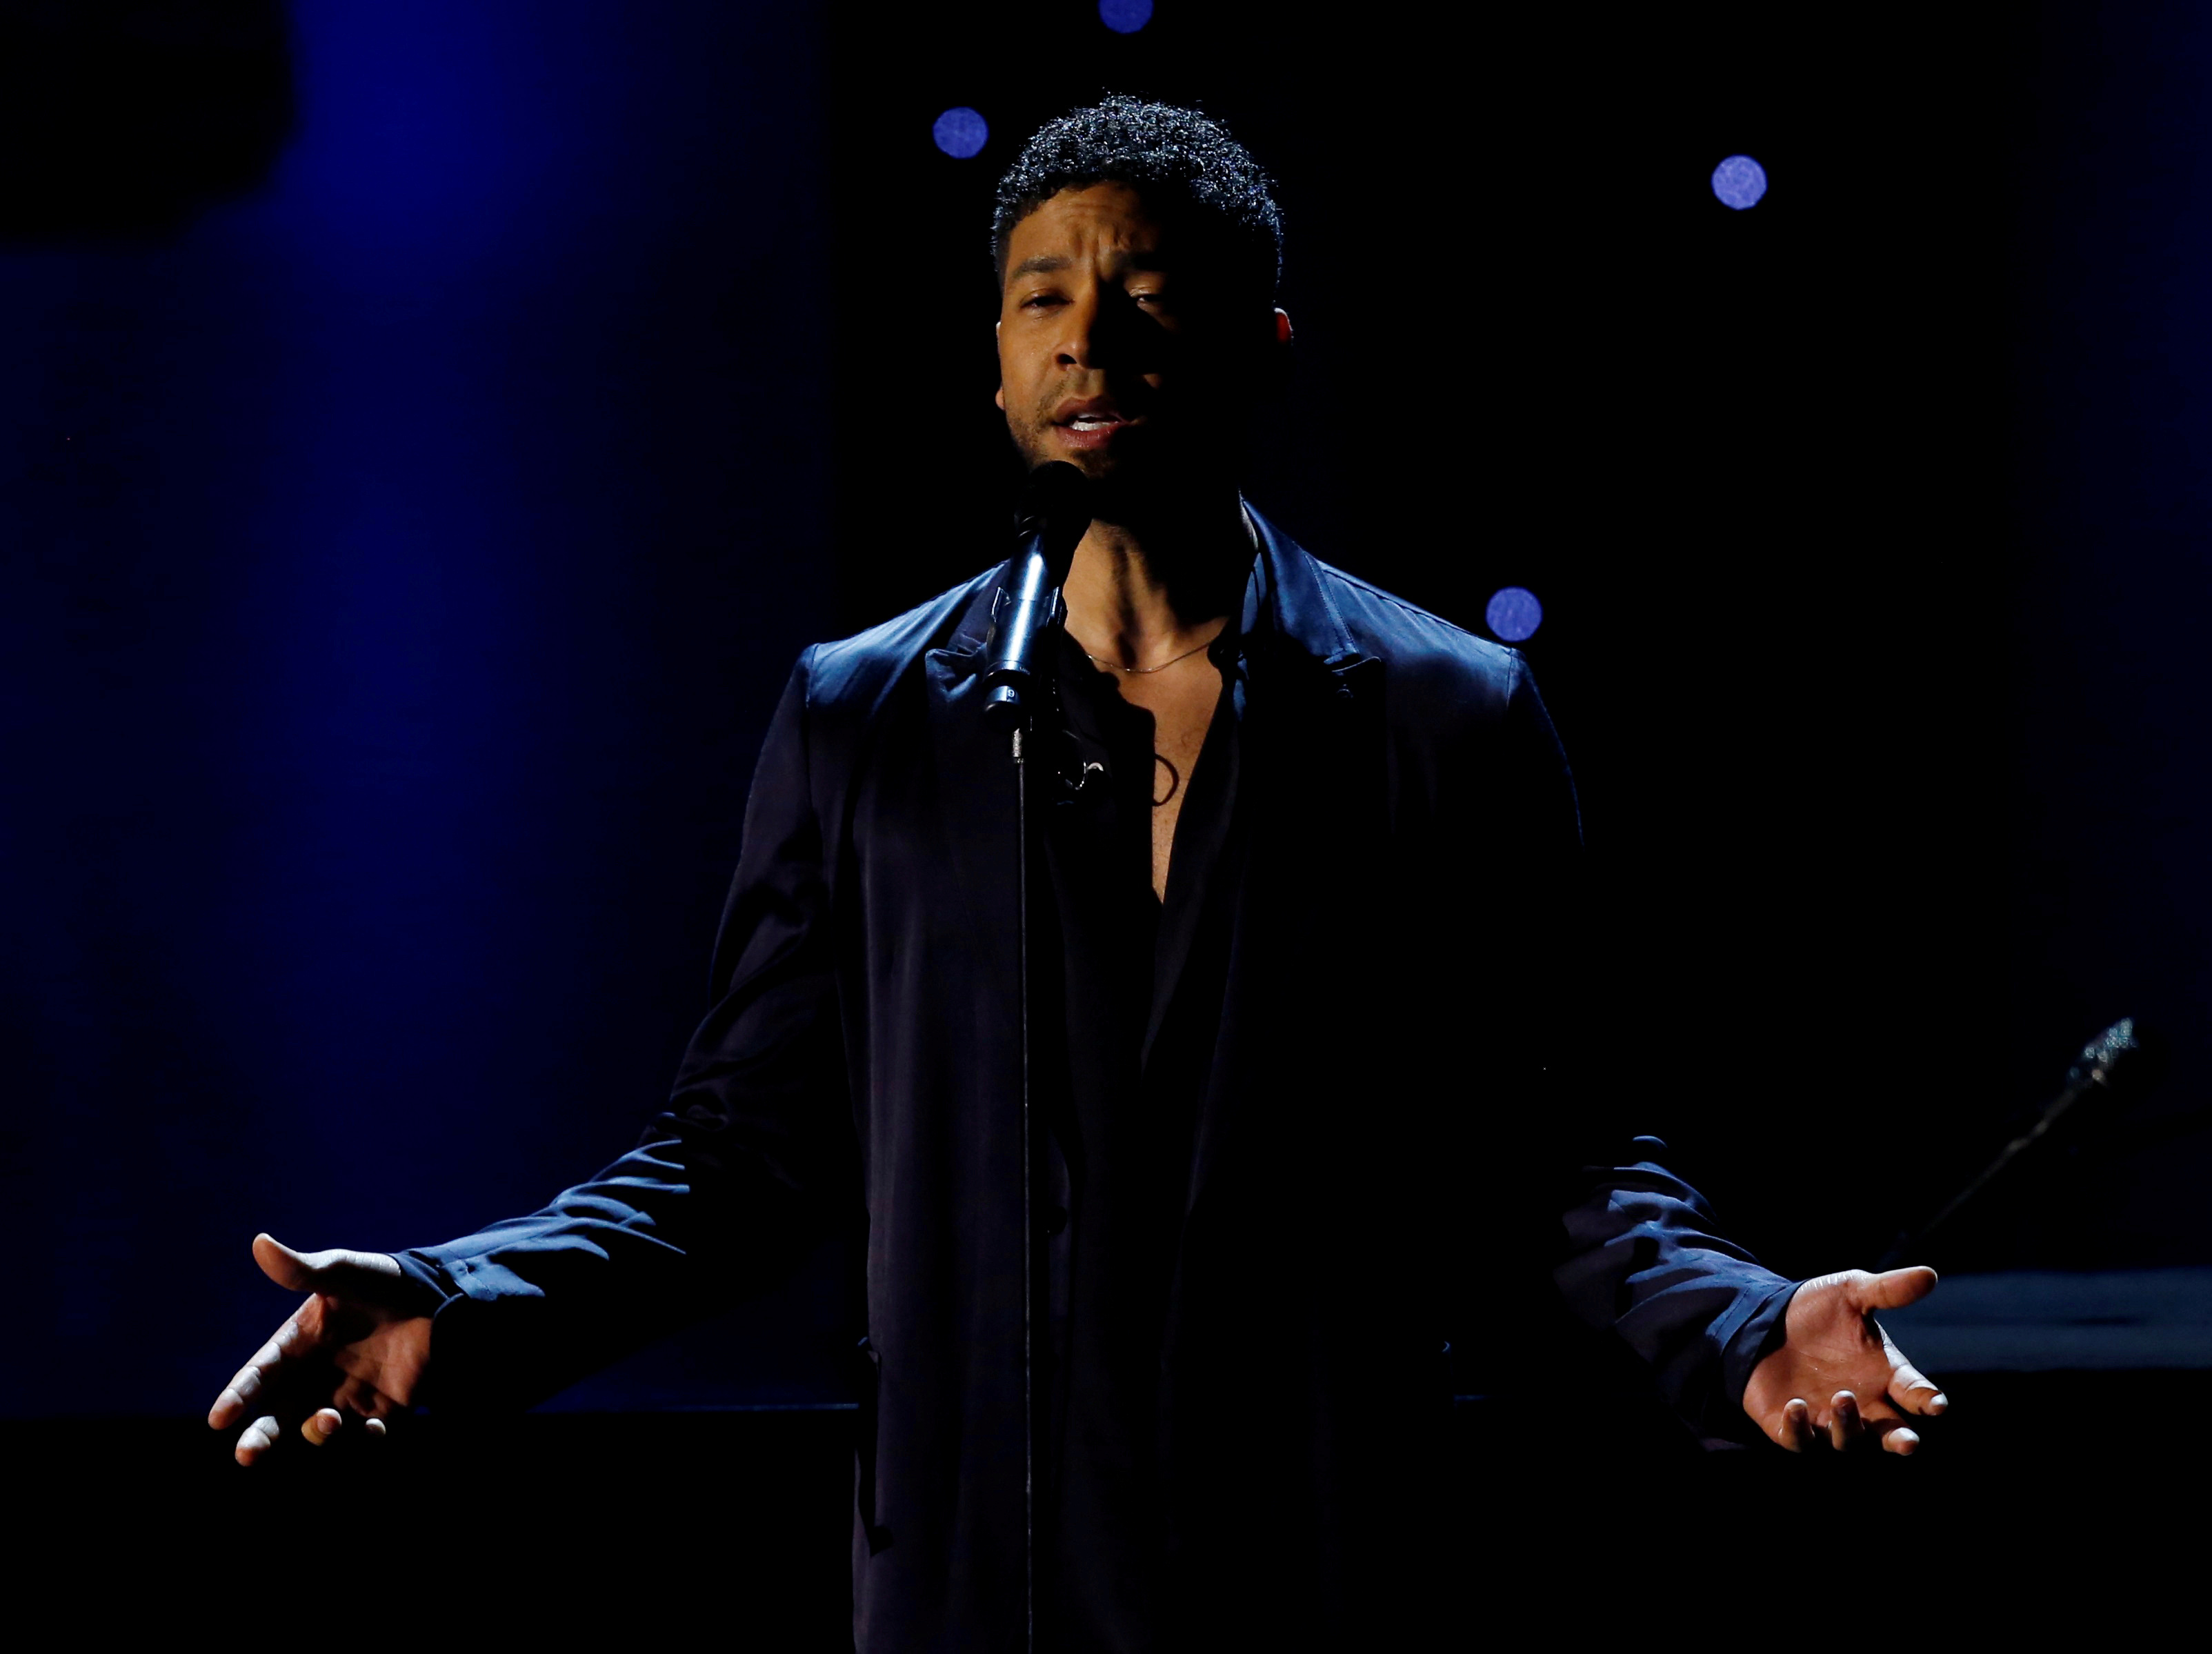 Empire actor Jussie Smollett charged with faking racist attack